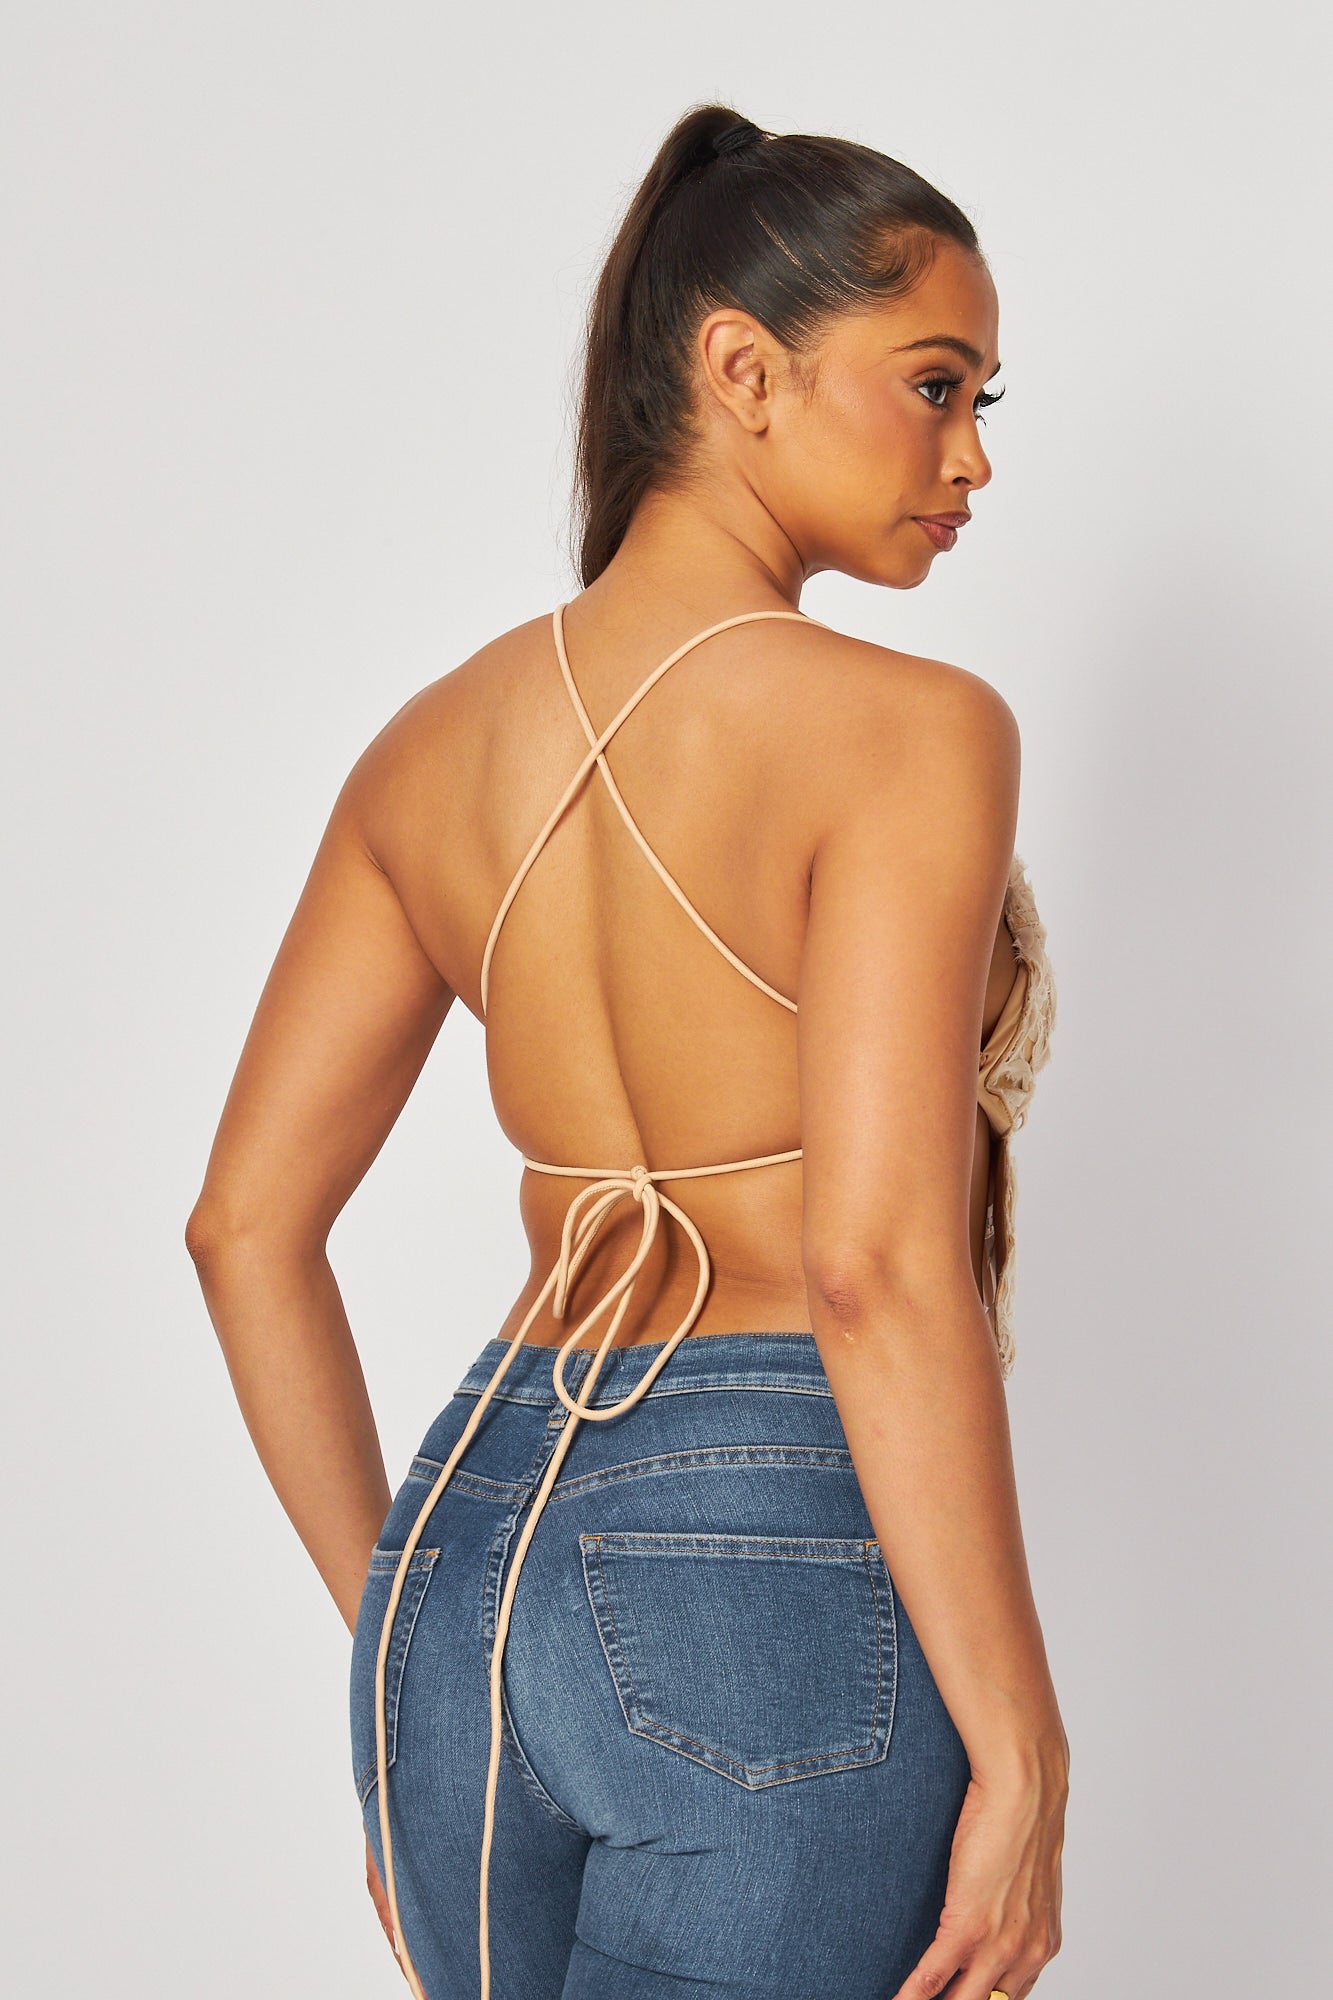 Beatrice Butterfly Backless Halter Crop Top